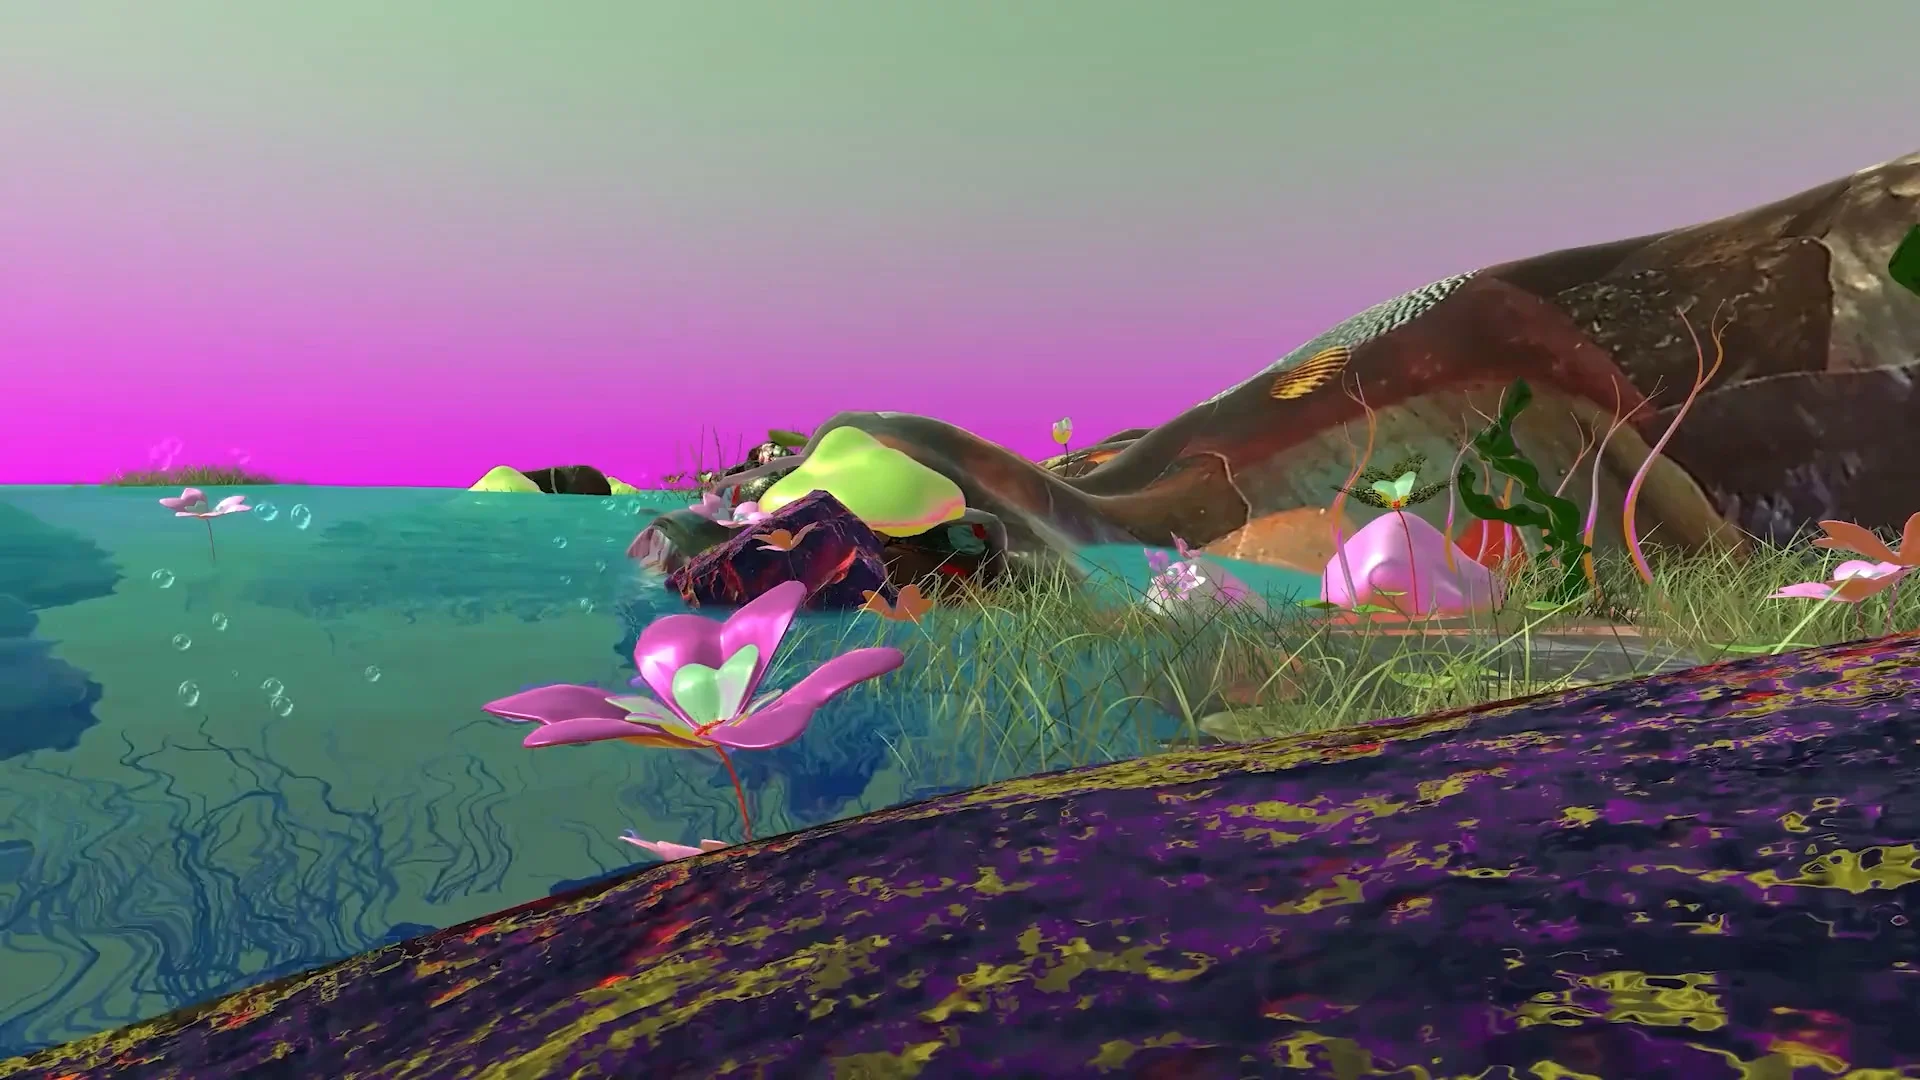 An excerpt from Diana Lynn Vandermeulen’s music video for “Earth”. Fantastical and colourful flowers and flowing strands of grass are situated beneath a lavender-blue ocean.